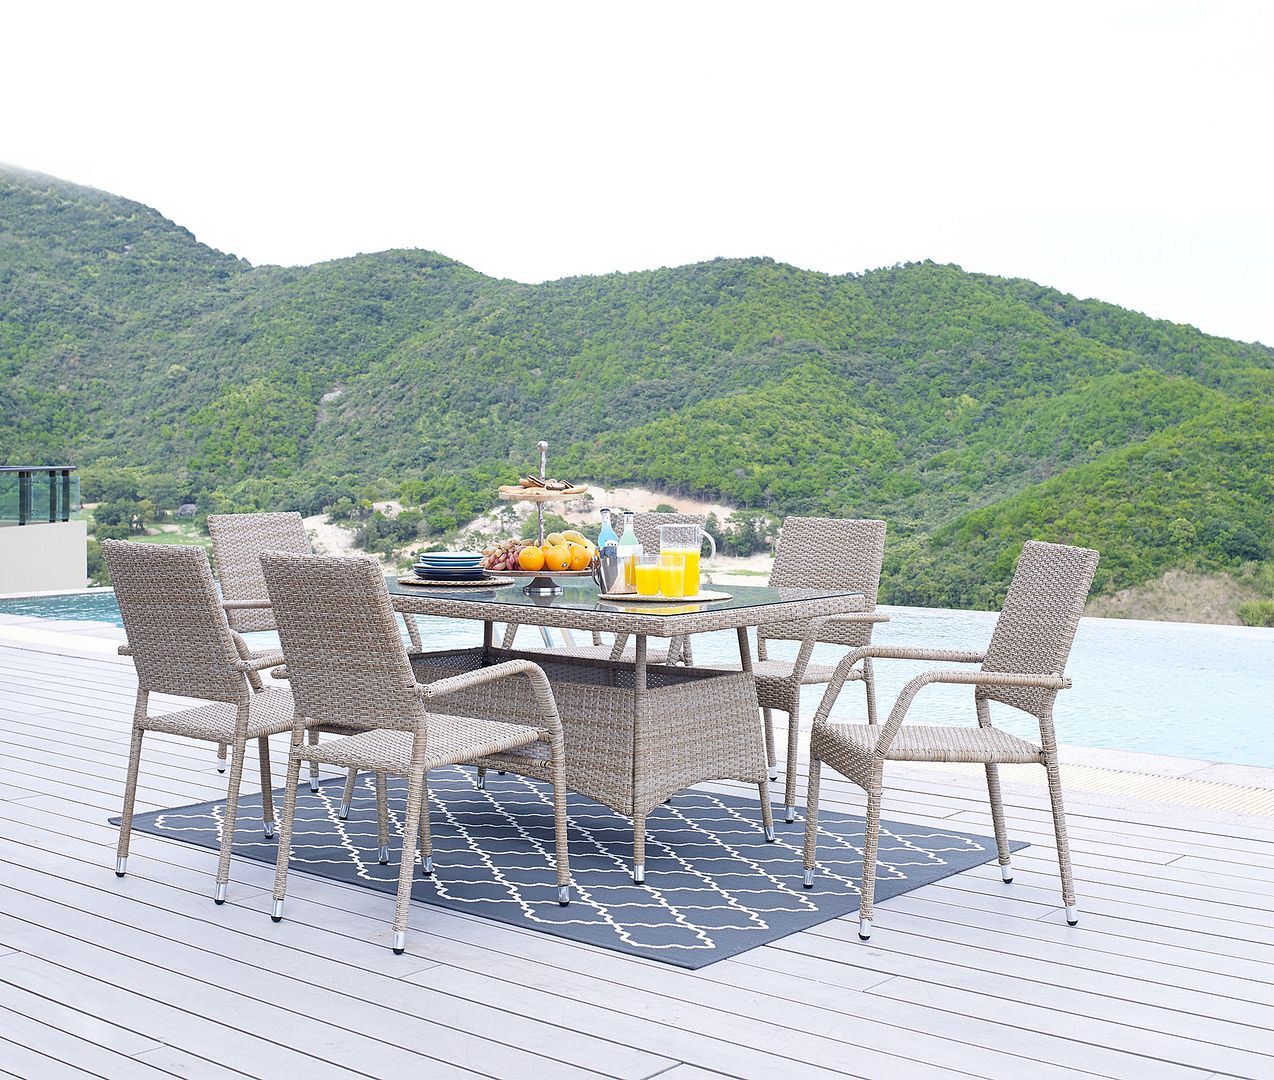 Nueces 63" Outdoor Dining Table - Nature Tan Weave